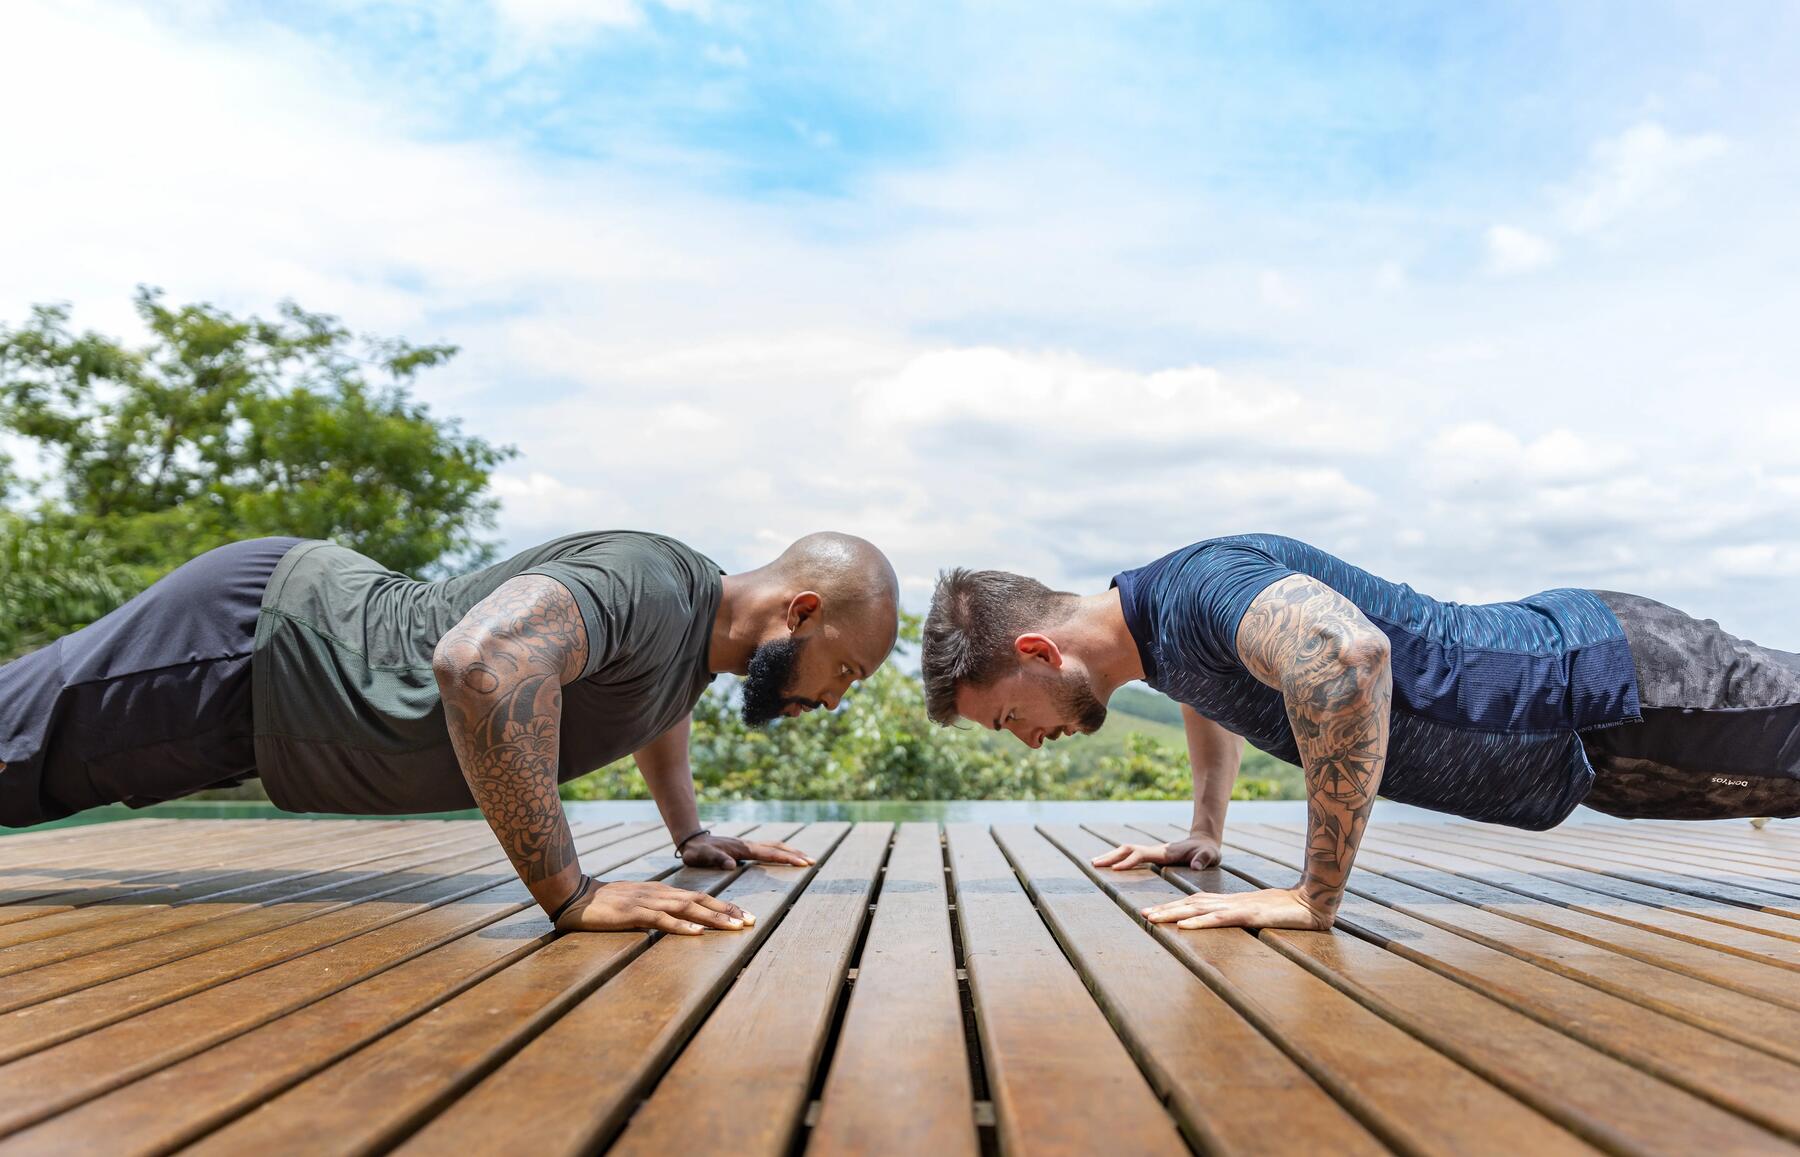 Two guys doing push ups outdoor on a wooden floor